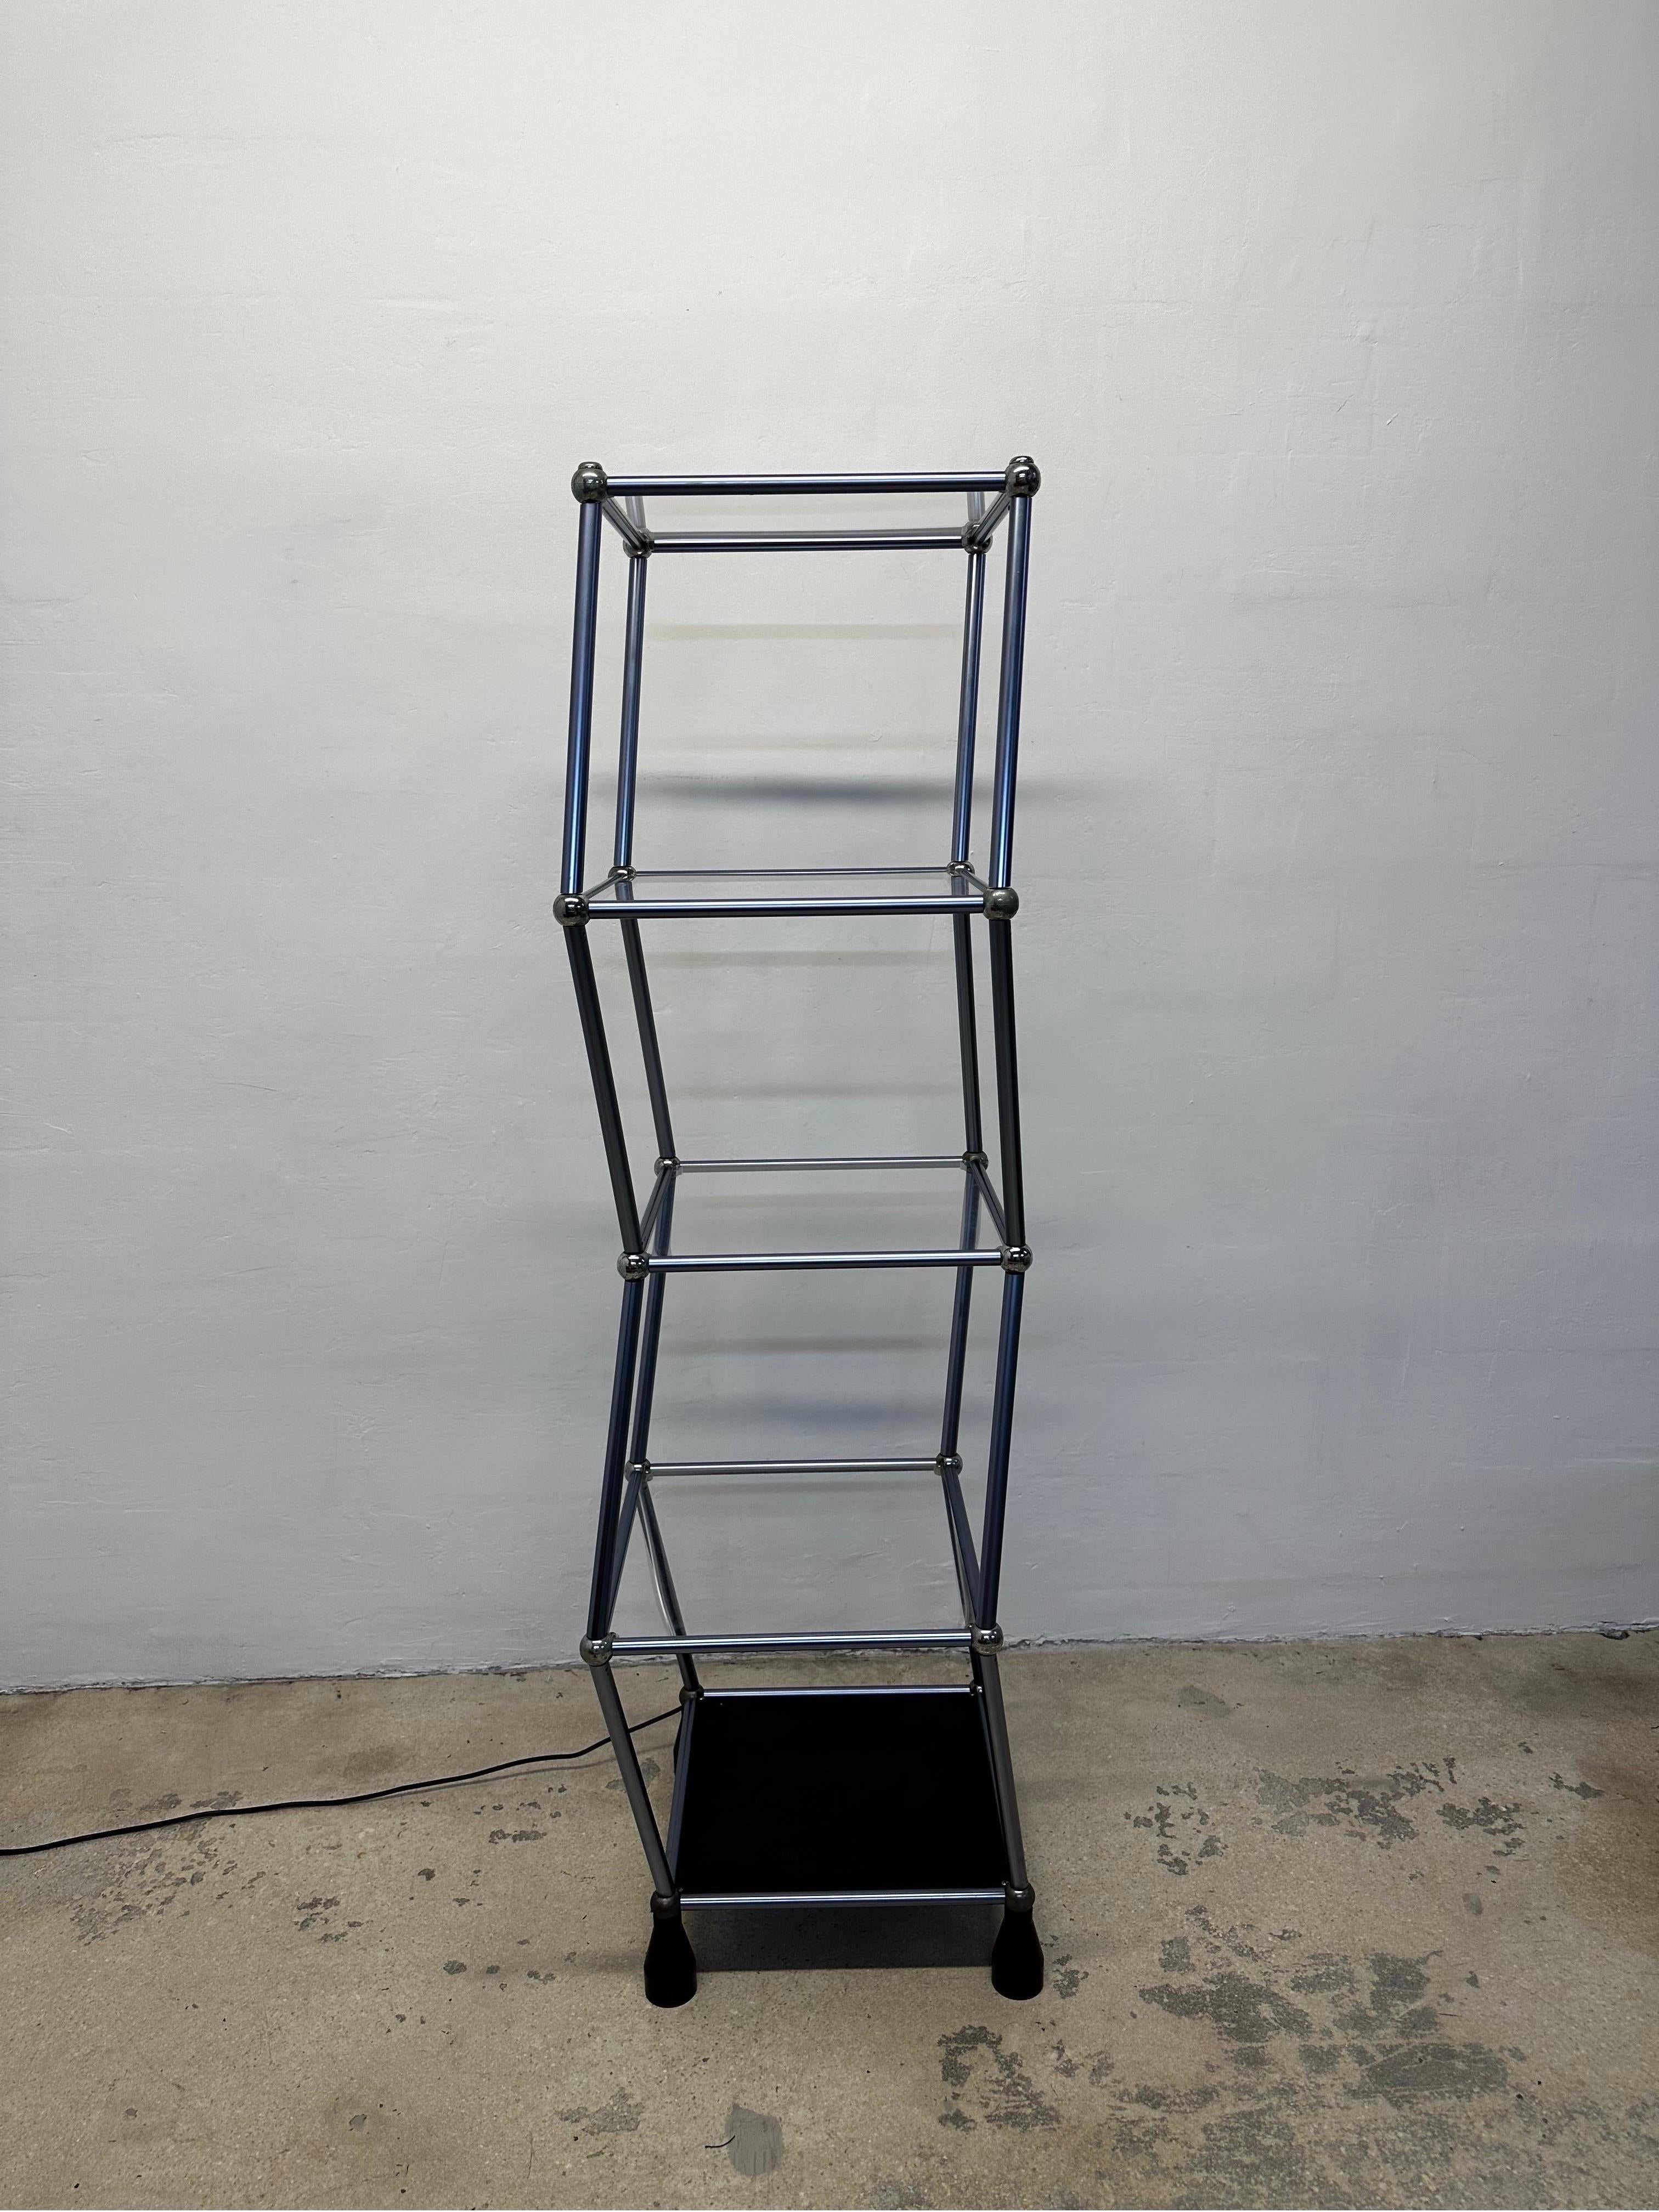 The kinetic dancing display shelves were originally designed by Cory Arcangel for use as product demonstrations. The acrylic shelves rest on rollers and are powered by a small motor under the unit that make the shelves literally dance.